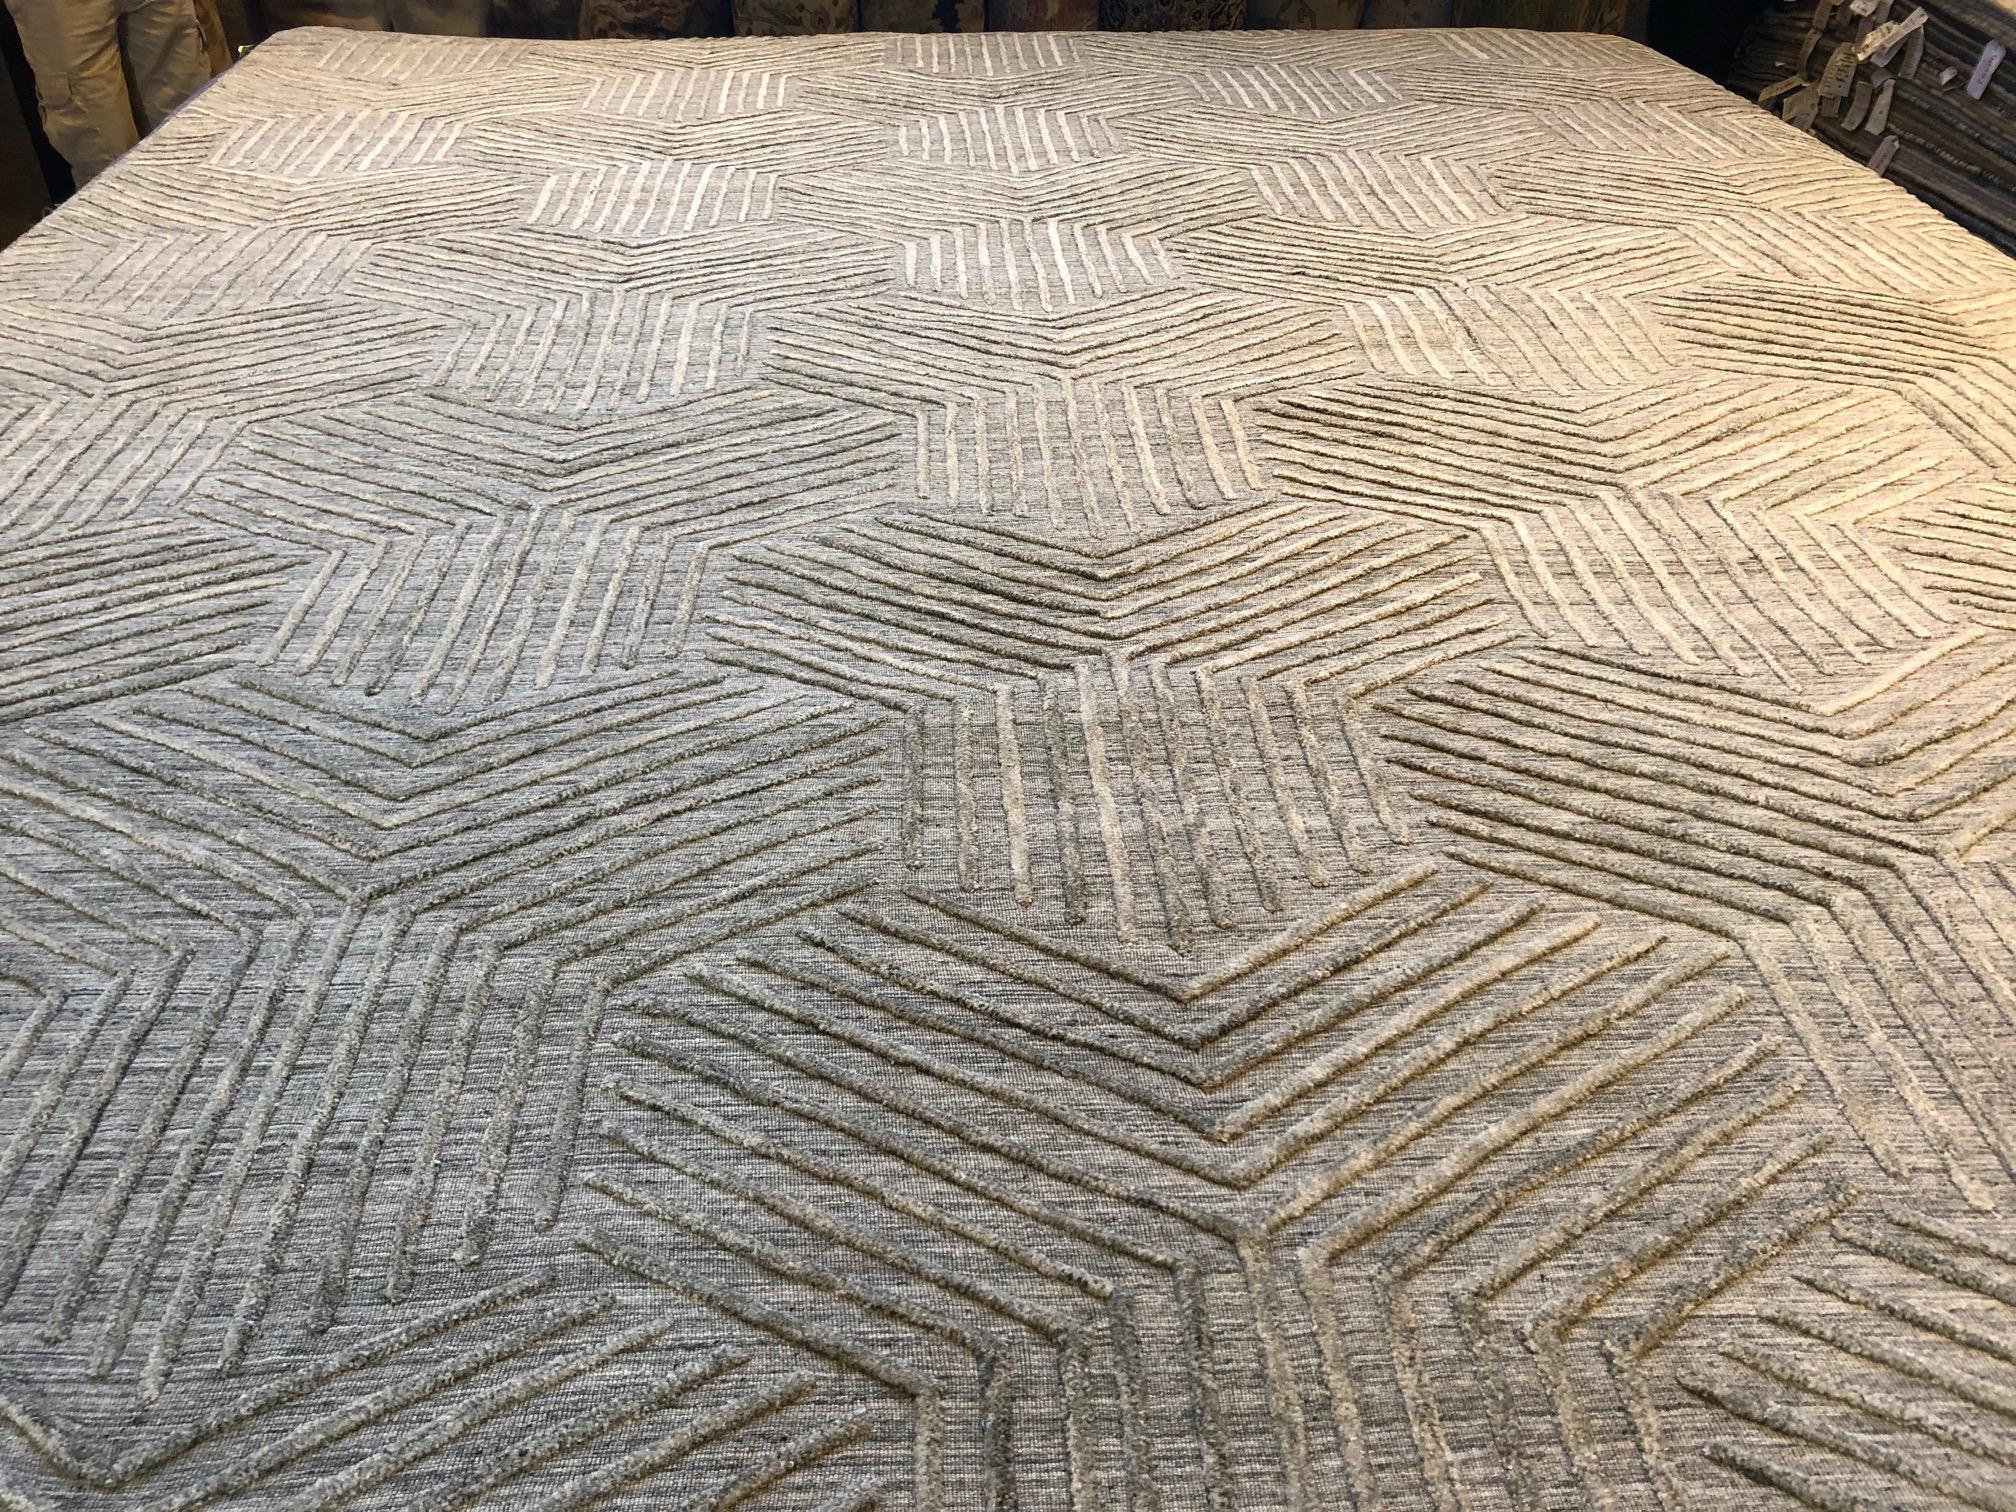 Lines and geometric shapes come together to create a vibrant pattern and texture in this hand knotted Indian wool rug. The neutral silver/grey tones make this a versatile addition to a wide range of spaces where it will enliven without overwhelming.